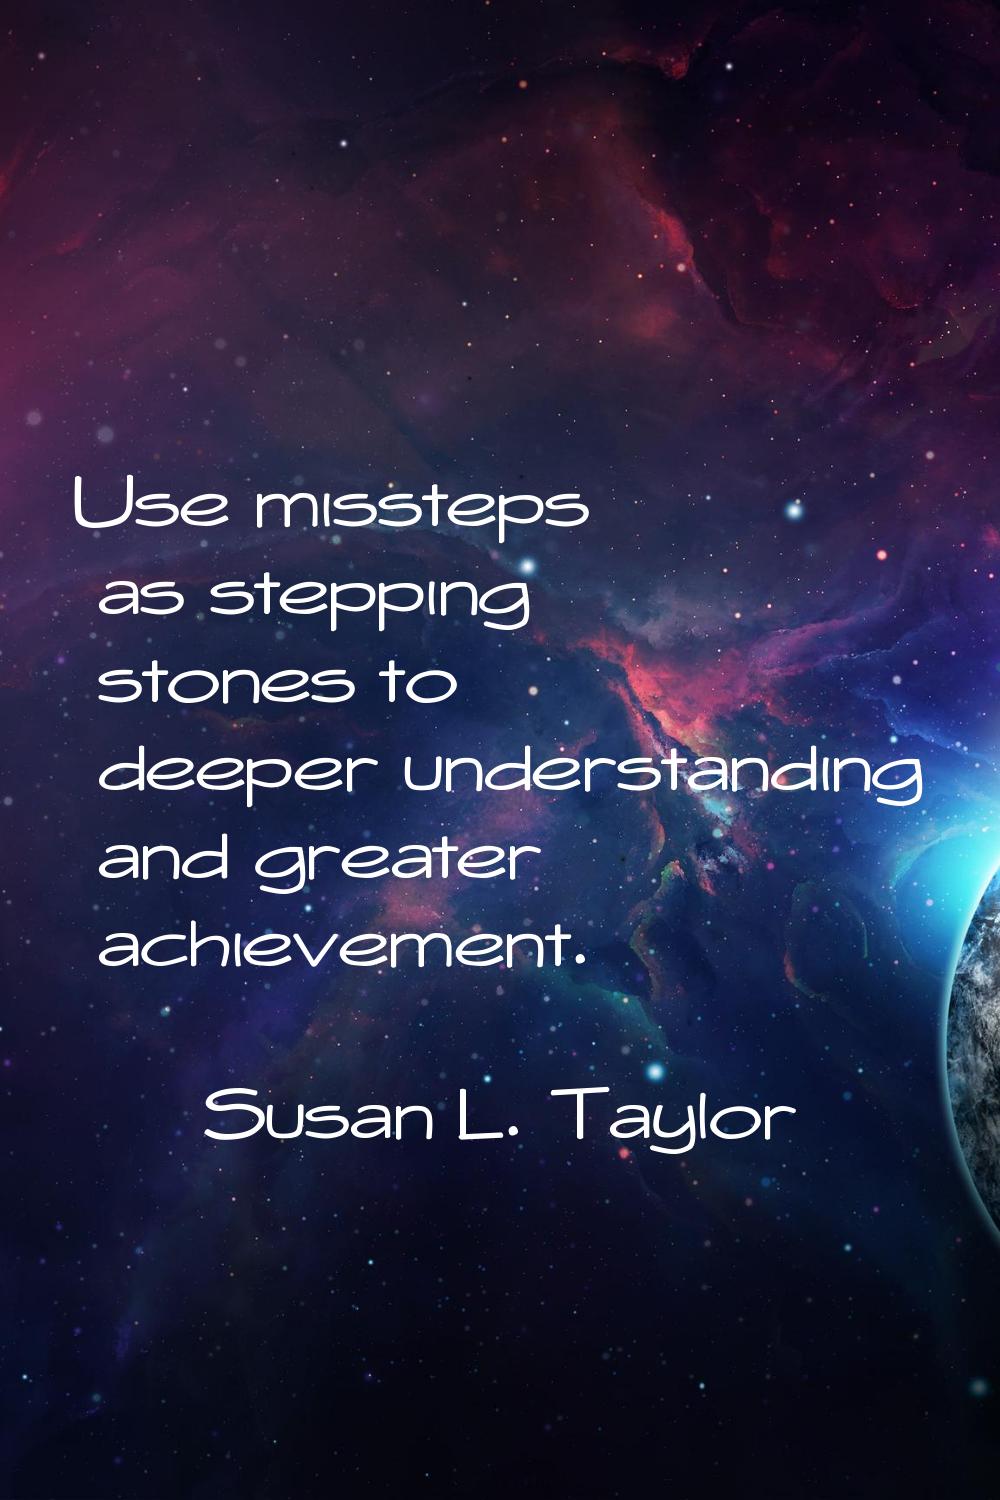 Use missteps as stepping stones to deeper understanding and greater achievement.